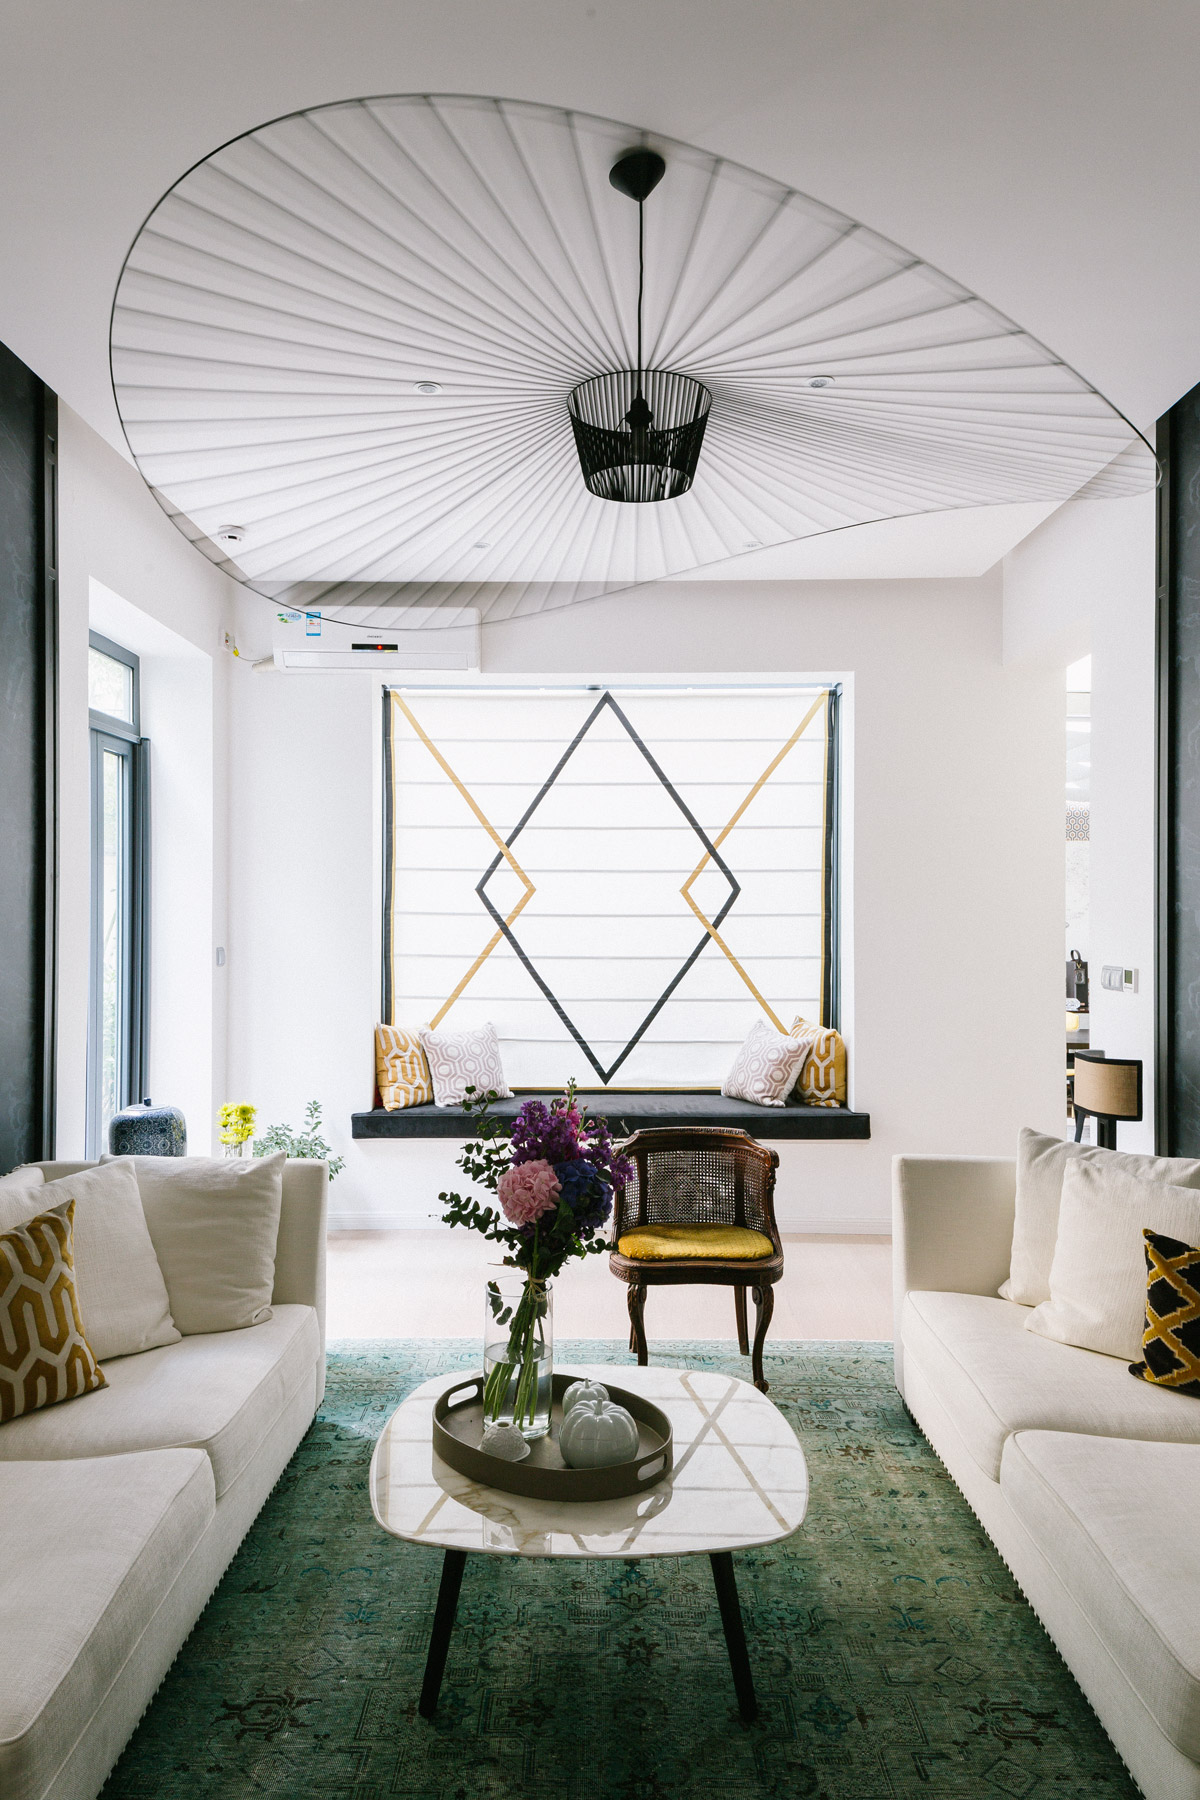 An etiquette school founder’s Shanghai home combines old world glamour with contemporary art